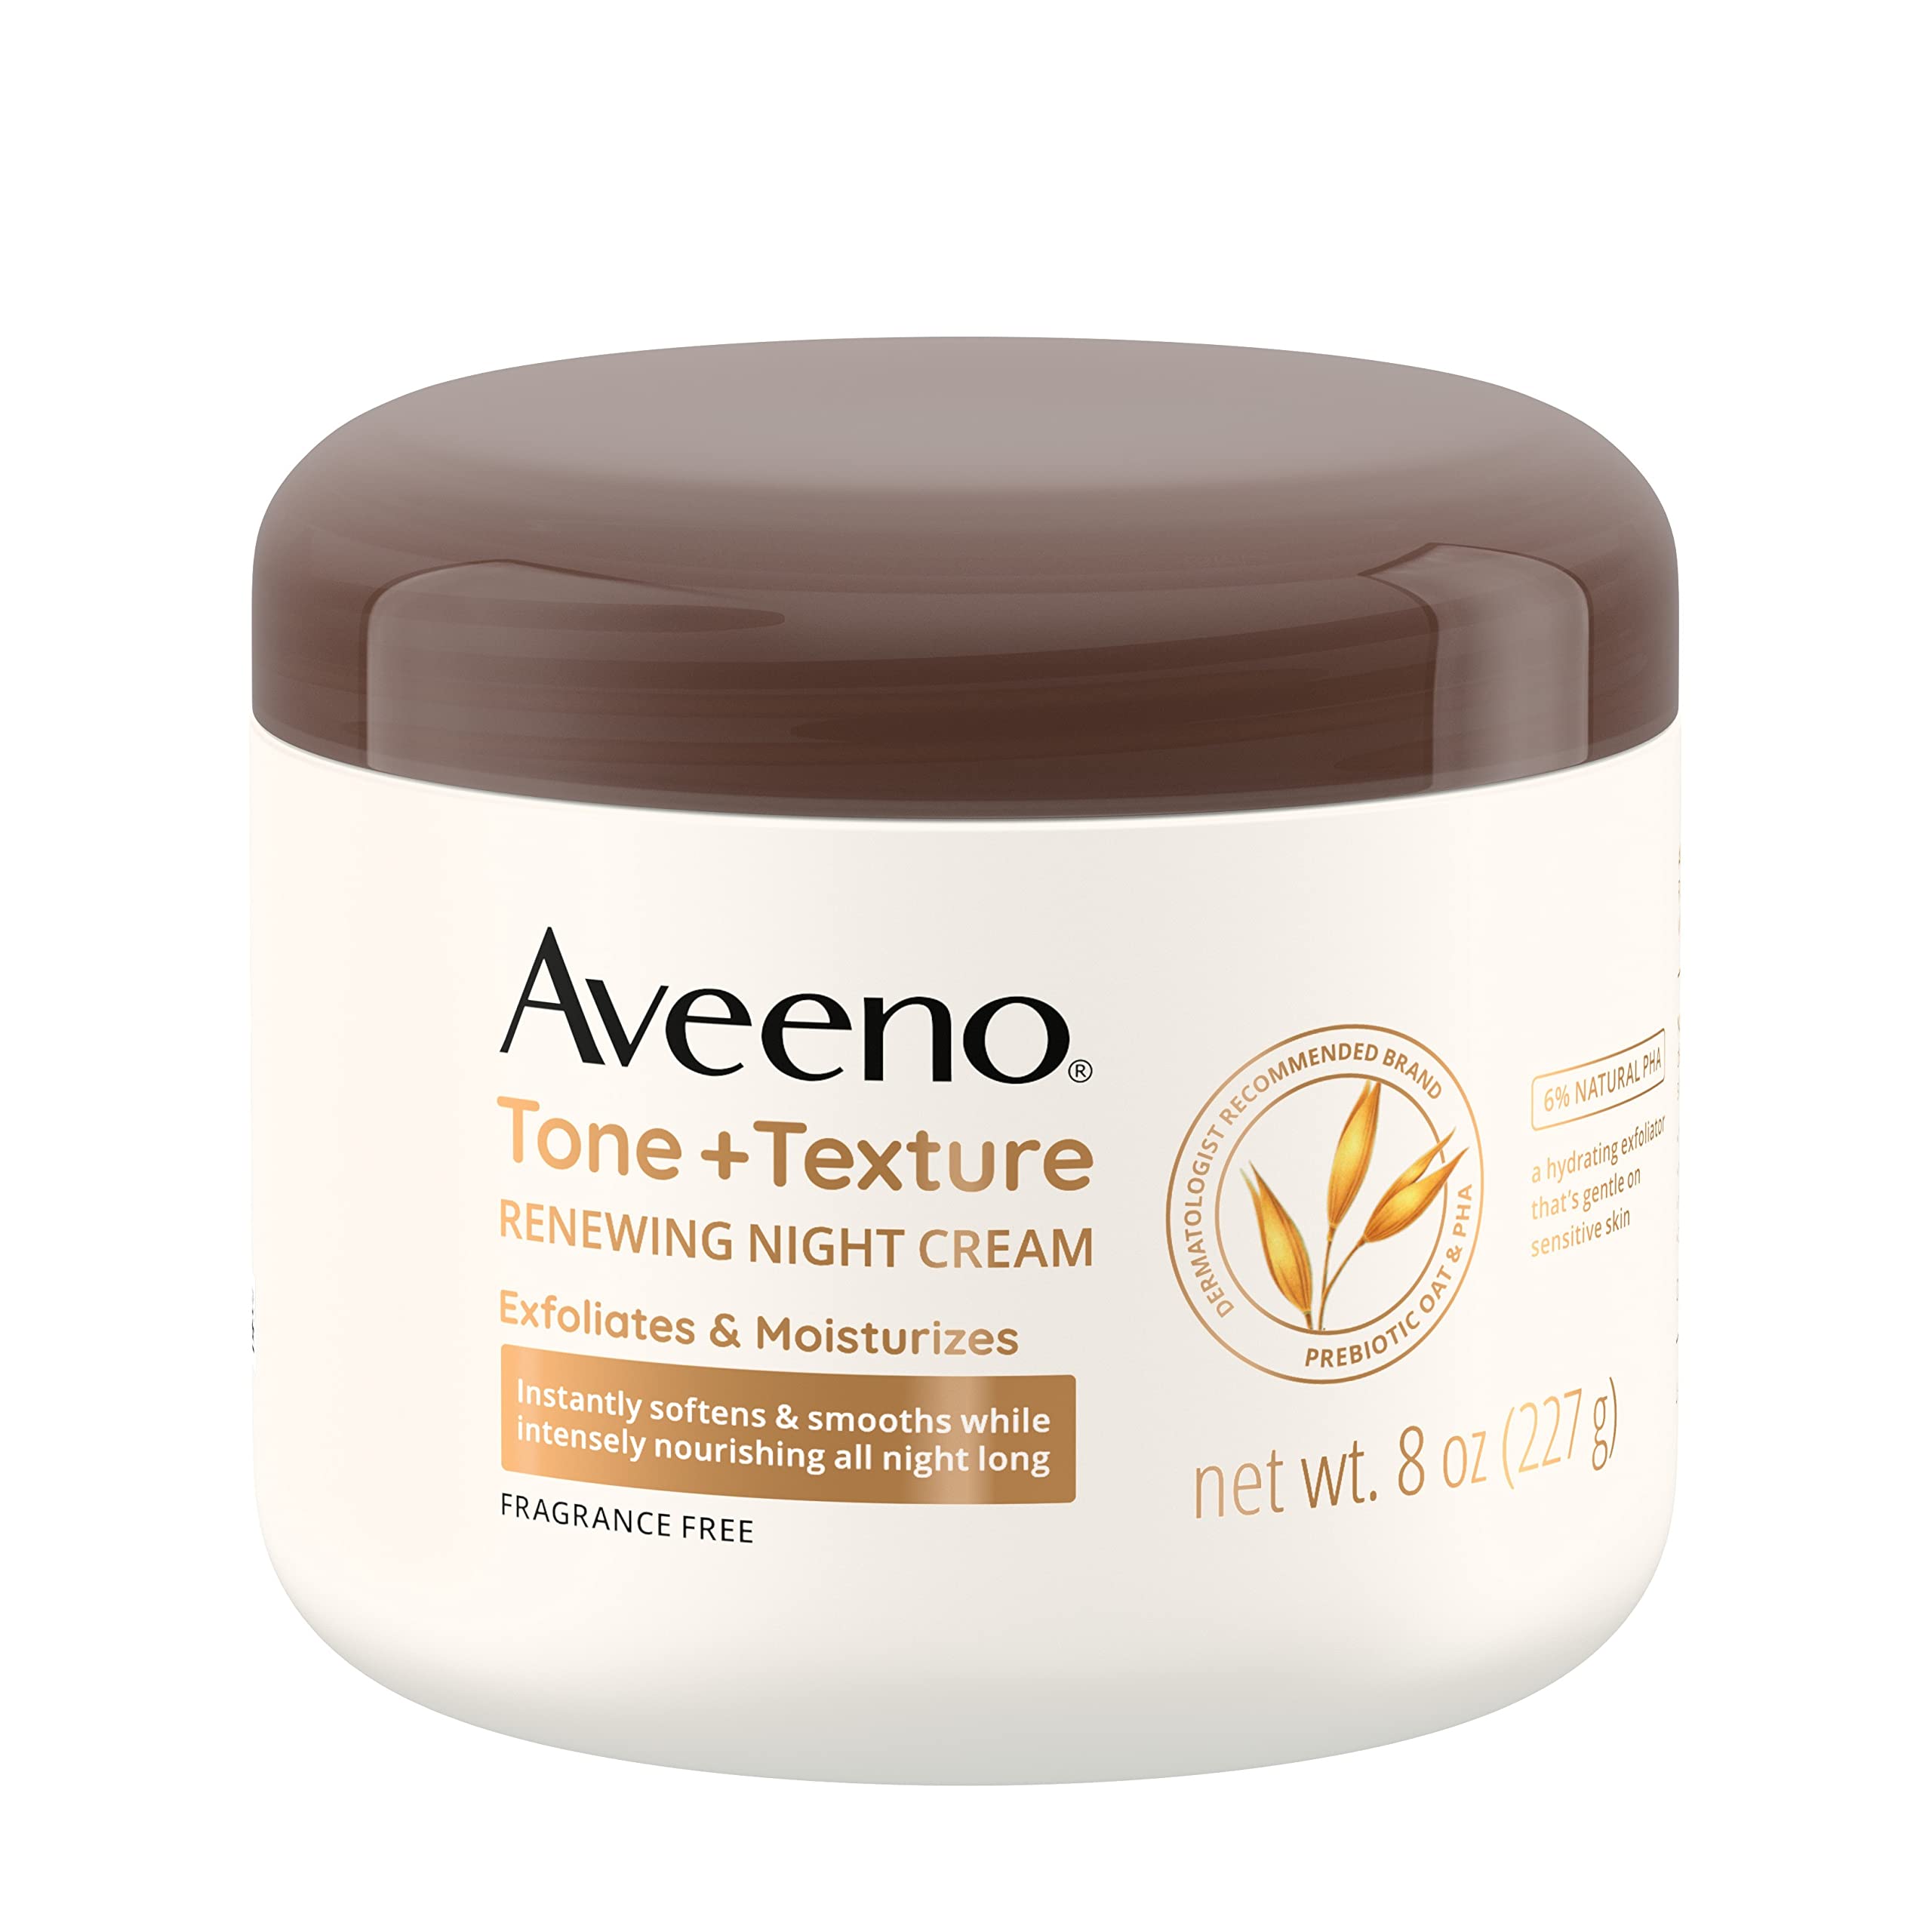 Aveeno Tone + Texture Renewing Night Cream With Prebiotic Oat, Gentle Cream Exfoliates & Moisturizes Sensitive Skin, Instantly Softens & Smooths & Intensely Nourishes, Fragrance-Free, 8 Oz